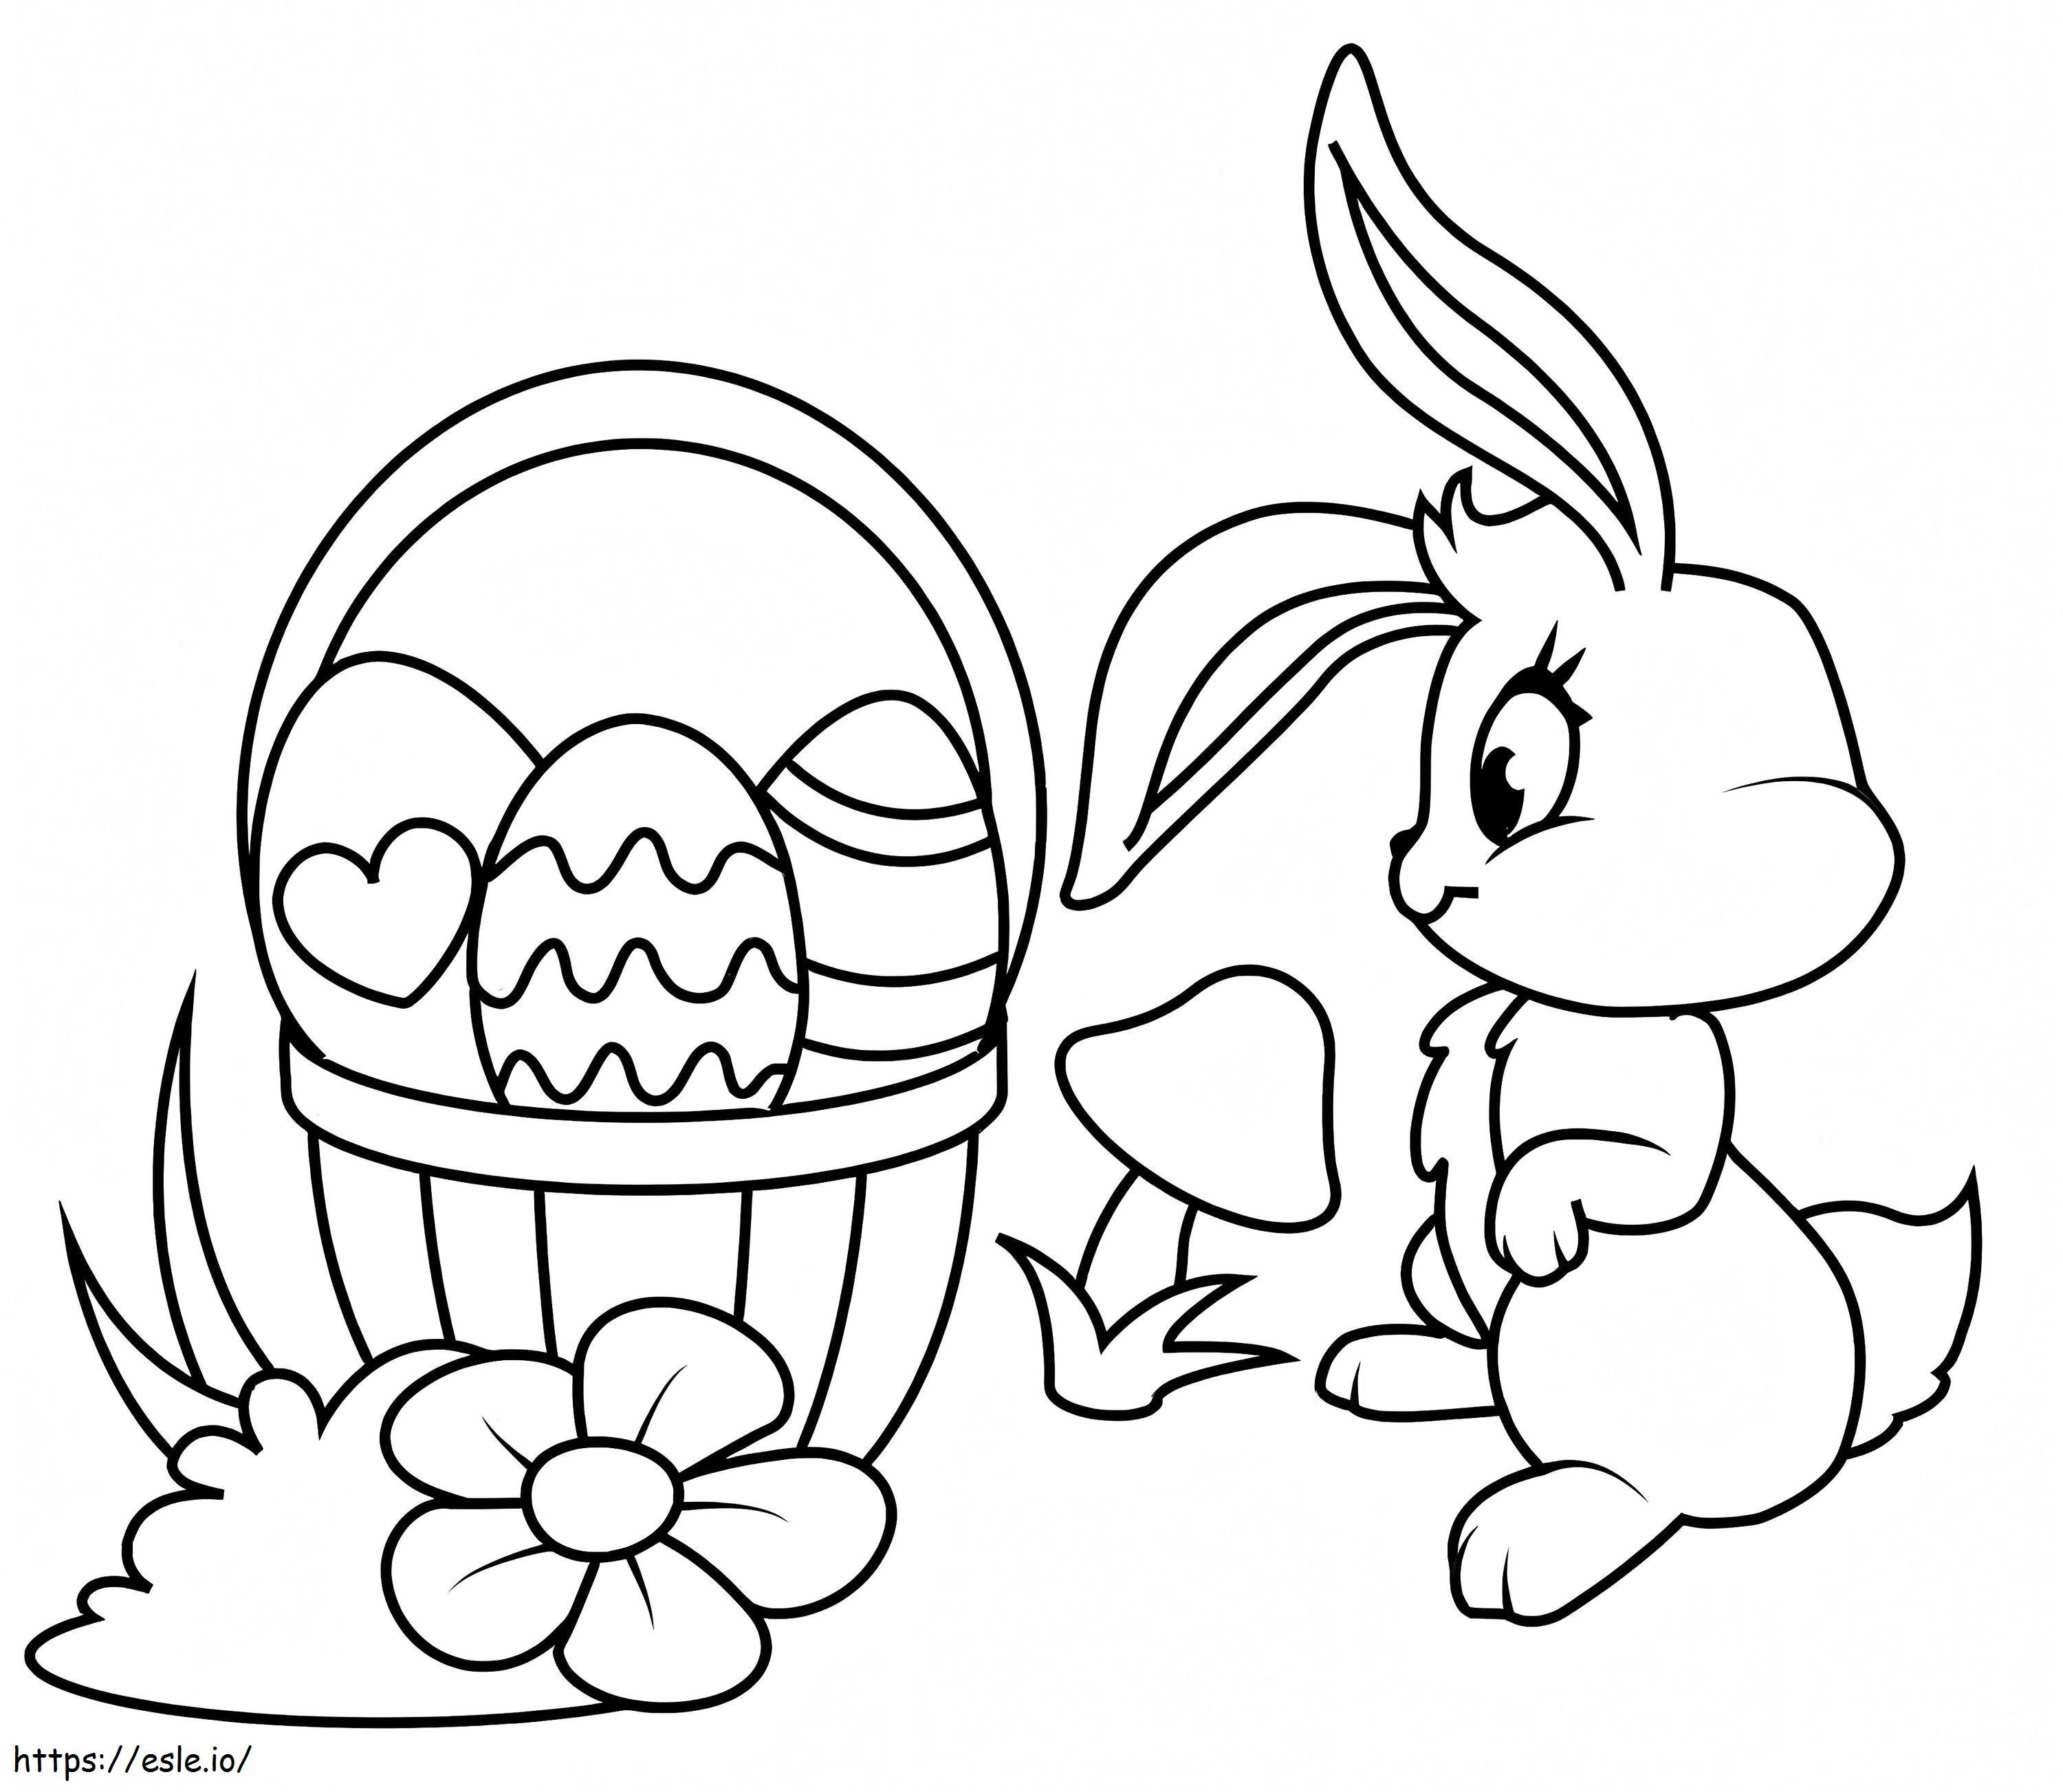 Easter Bunny With Basket Of Eggs coloring page